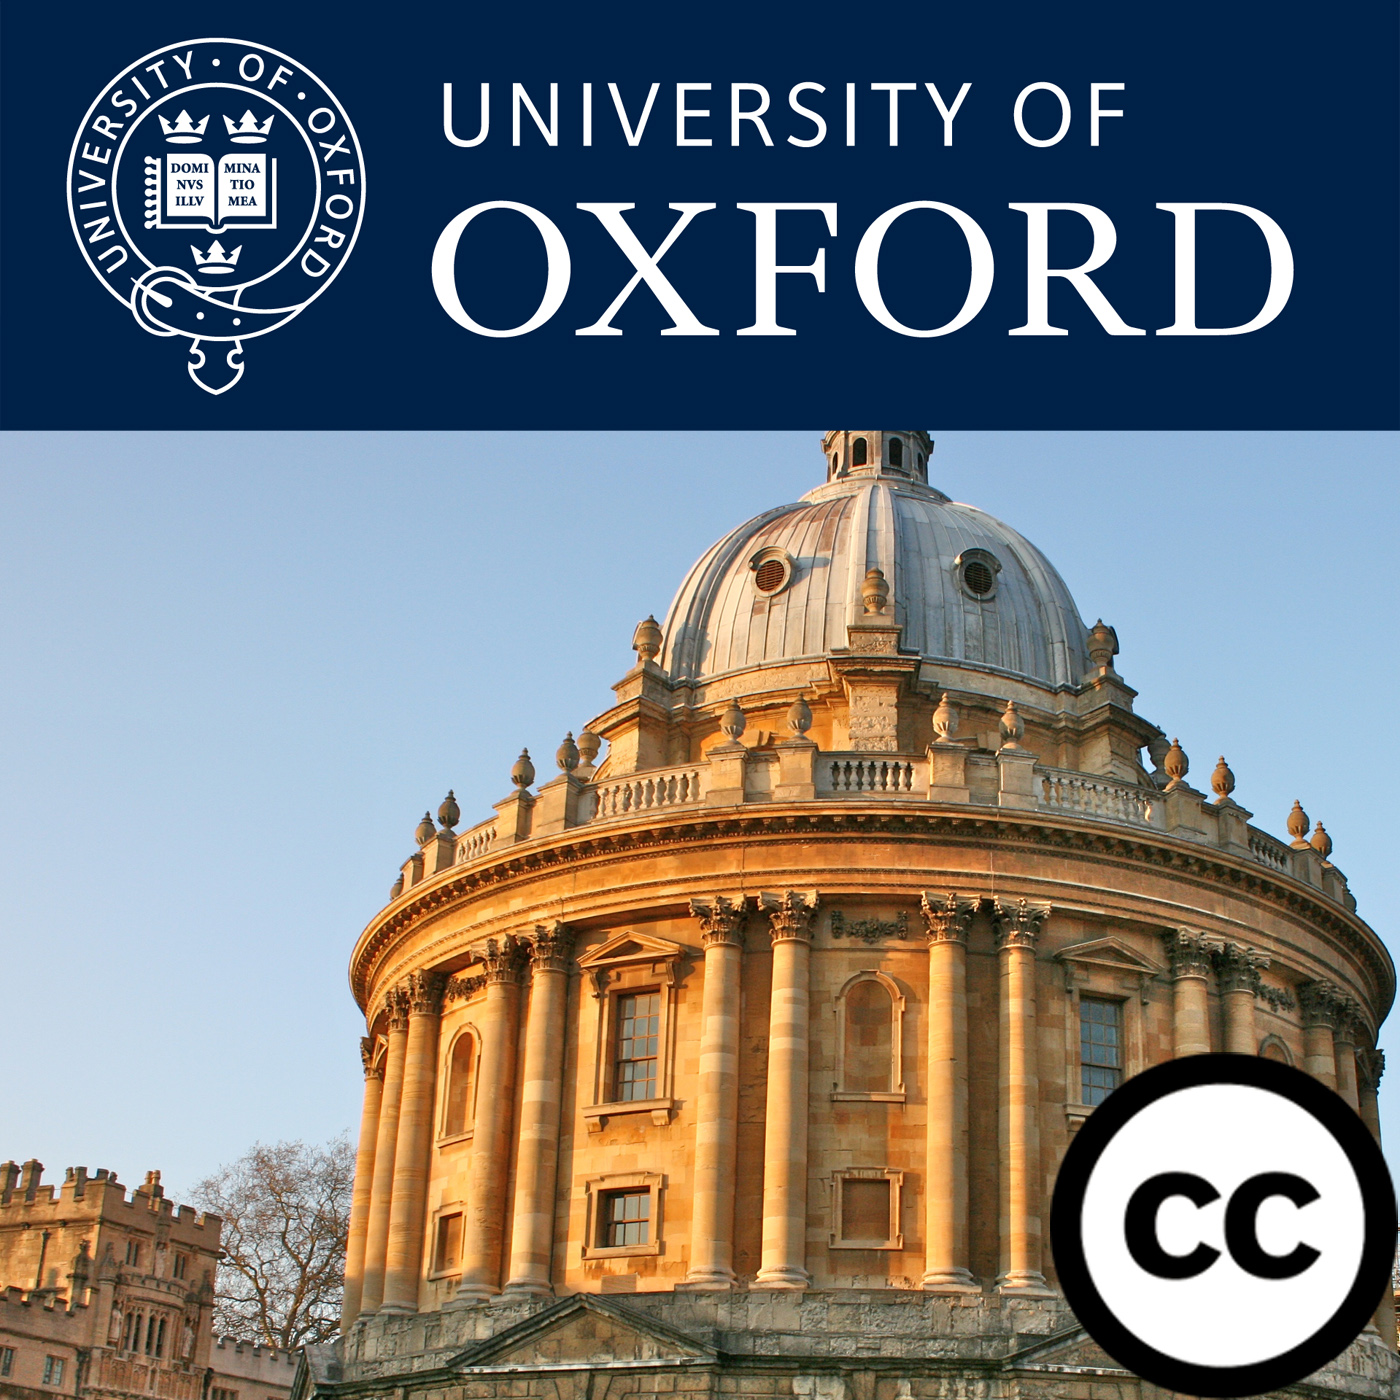 Openness at Oxford